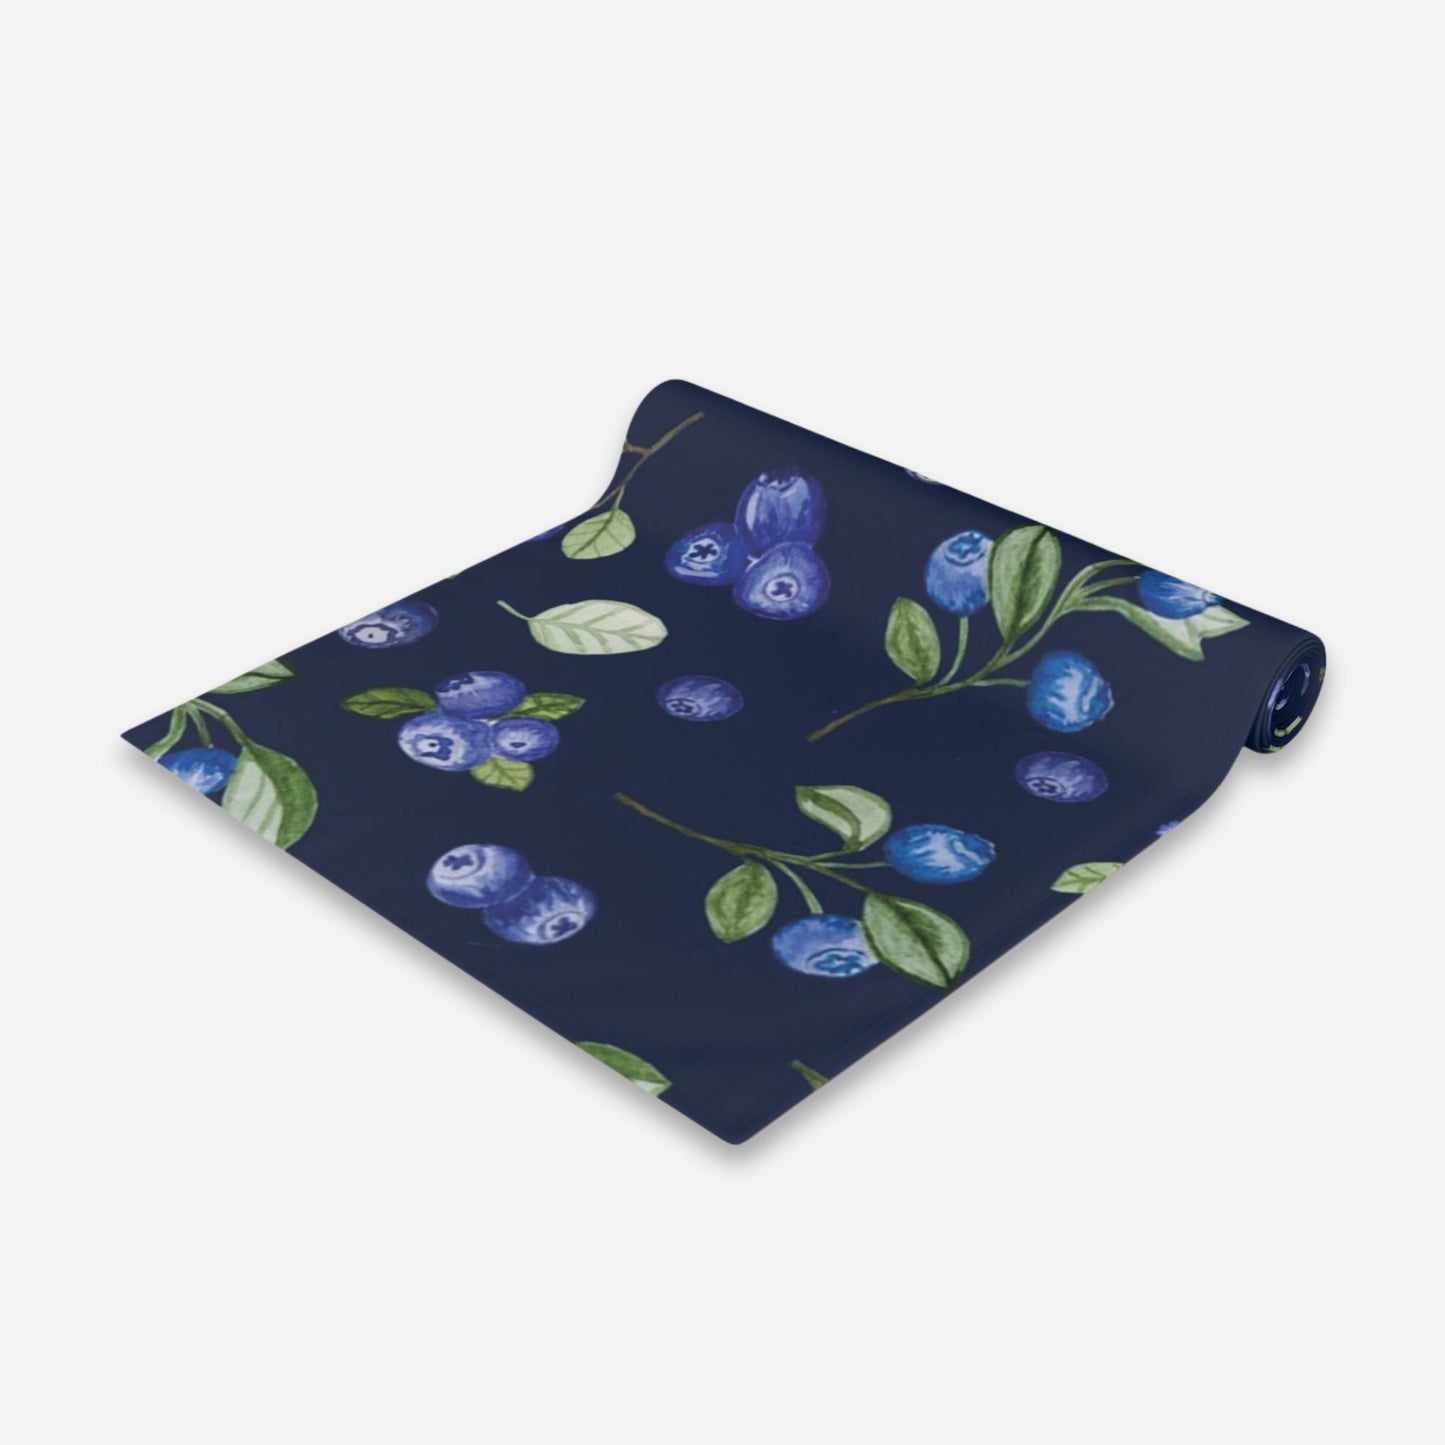 A navy blue table runner adorned with a pattern of blueberries and green leaves